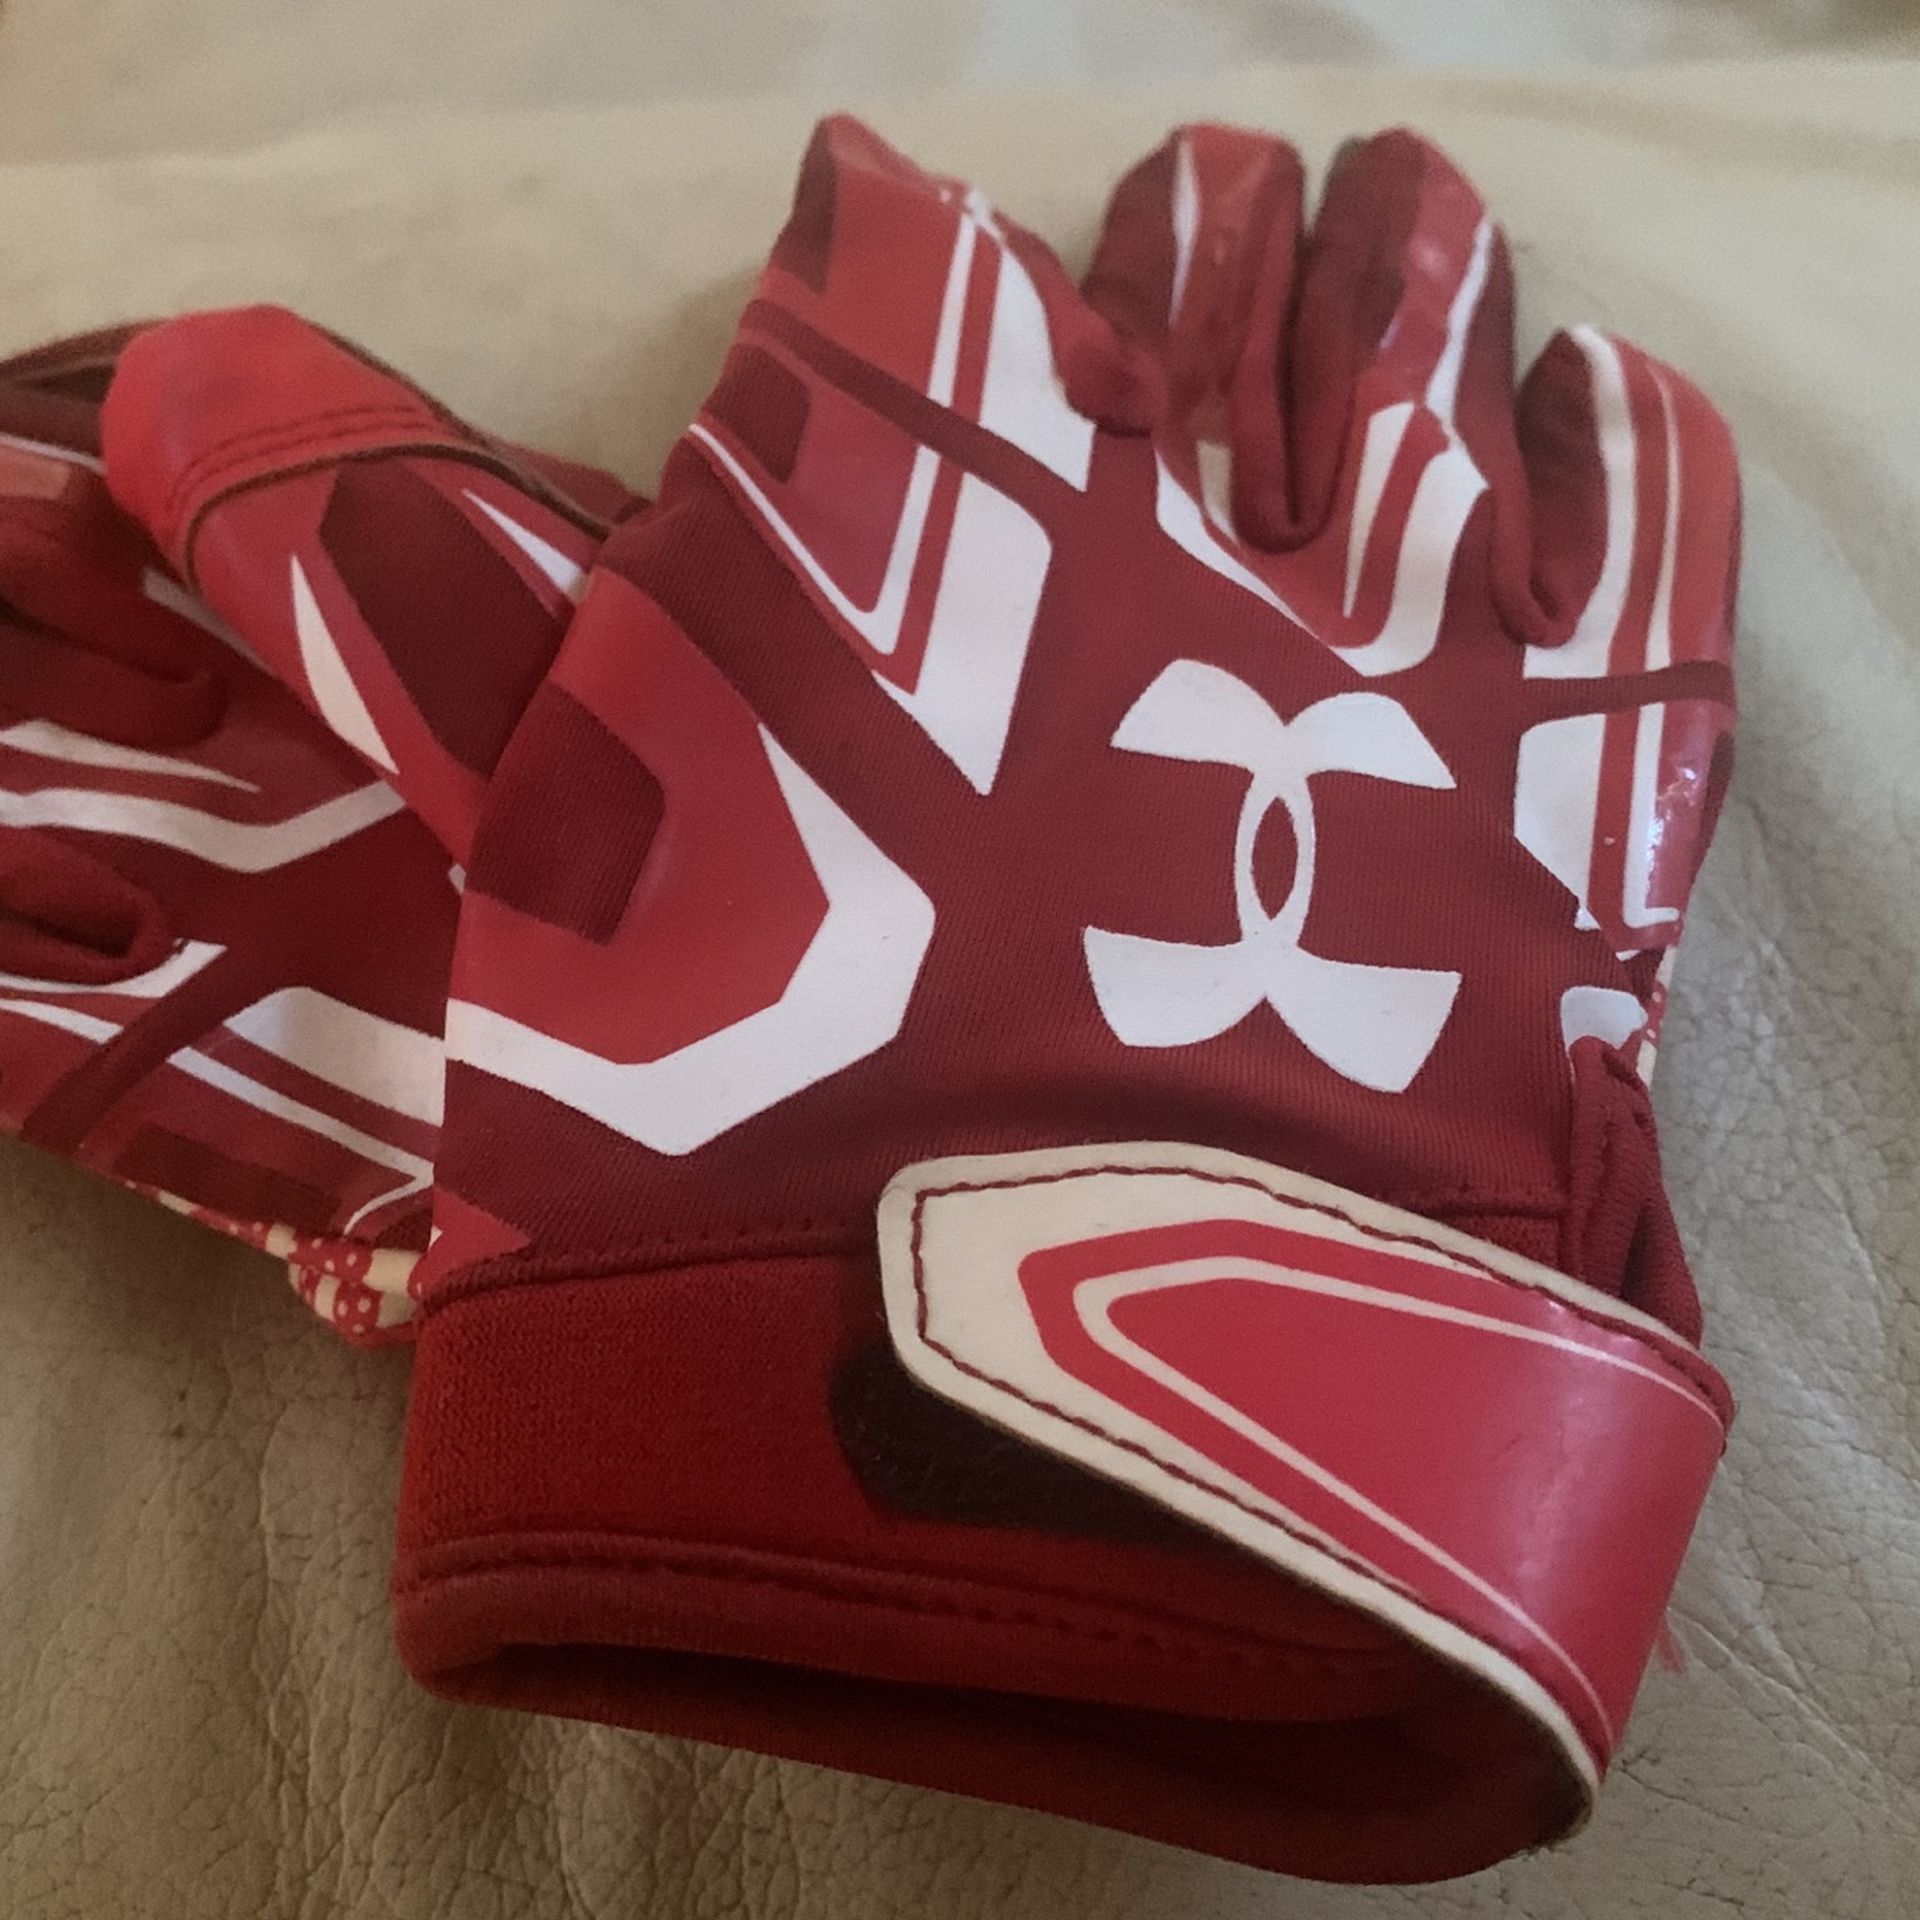 Under Armour - Youth Gloves